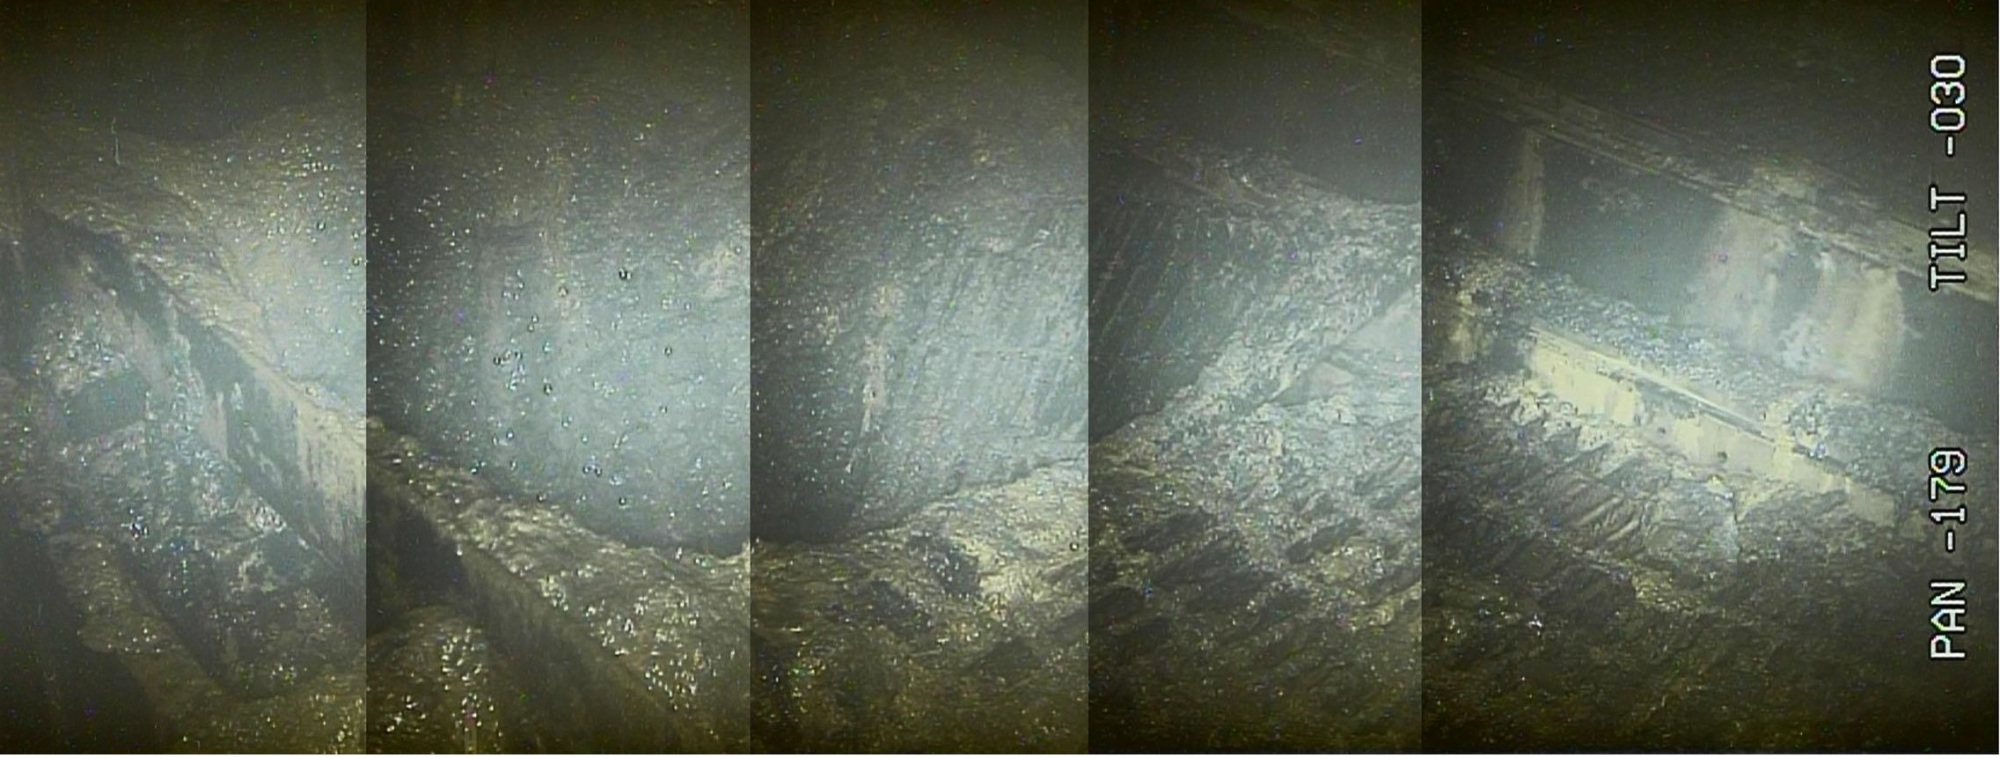 Based on image analysis, a two-meter hole has been found in the metal grate under a pressure vessel in reactor No. 2's containment vessels at the Fukushima No. 1 nuclear power plant. | TOKYO ELECTRIC POWER COMPANY HOLDINGS INC. / VIA KYODO